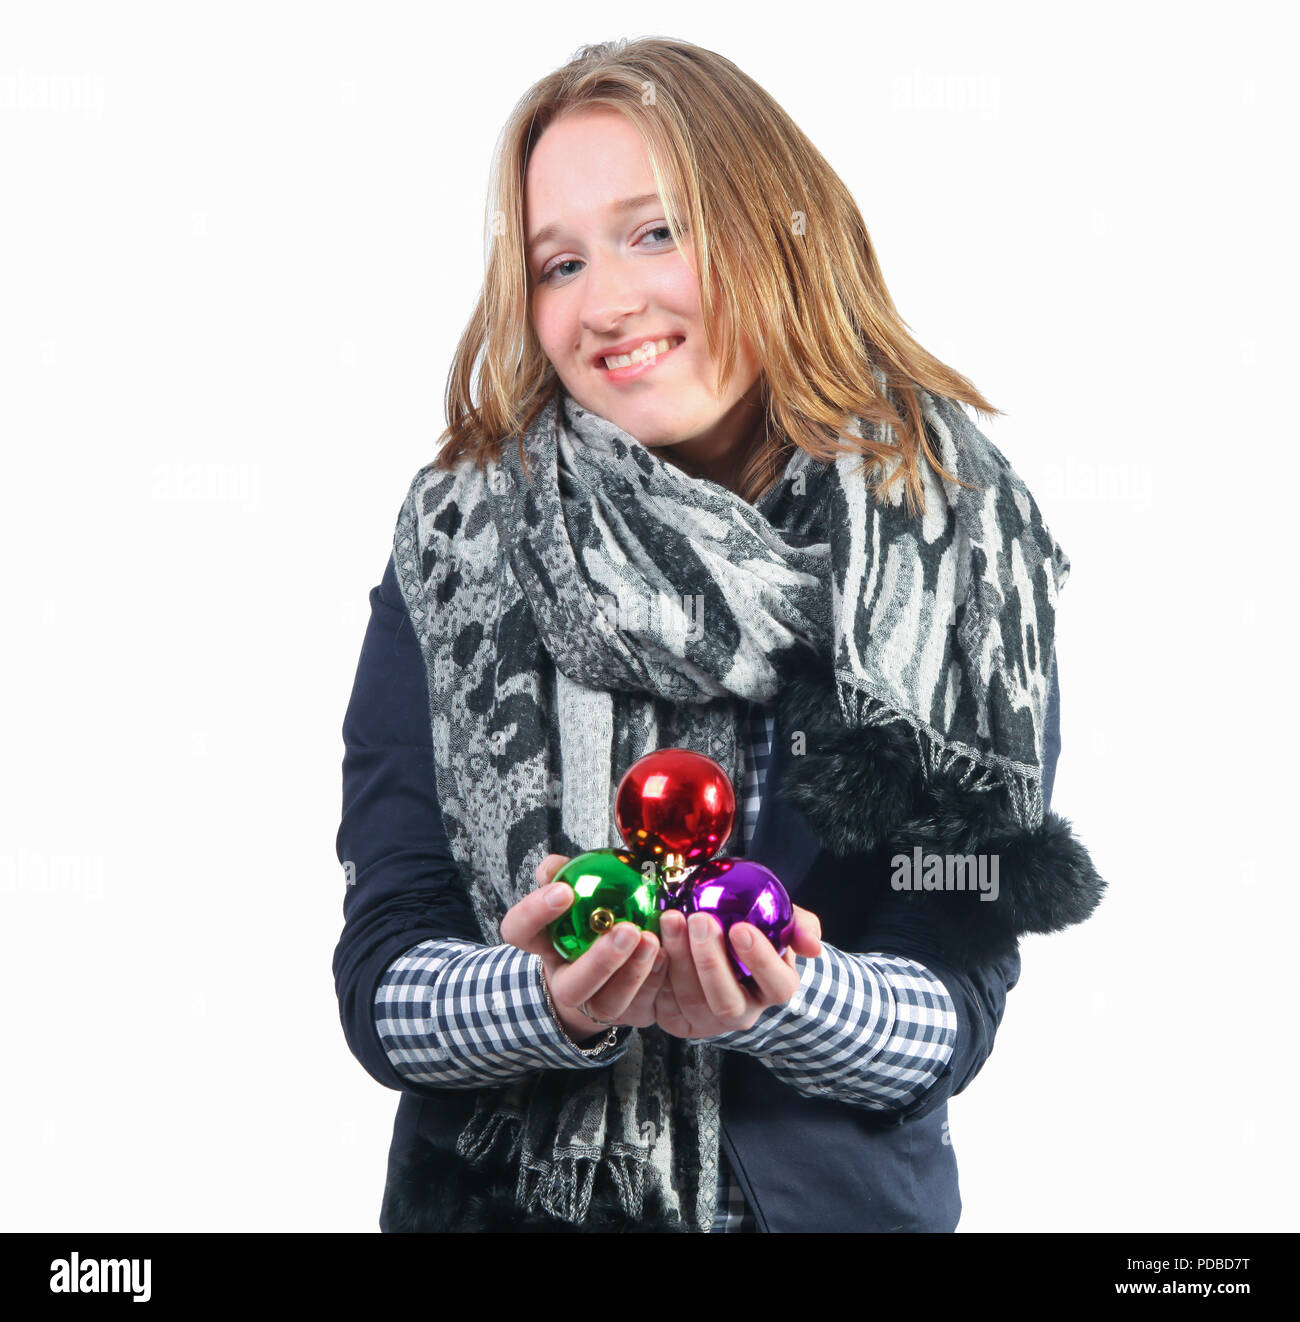 Woman with scarf holding Christmas baubles Stock Photo